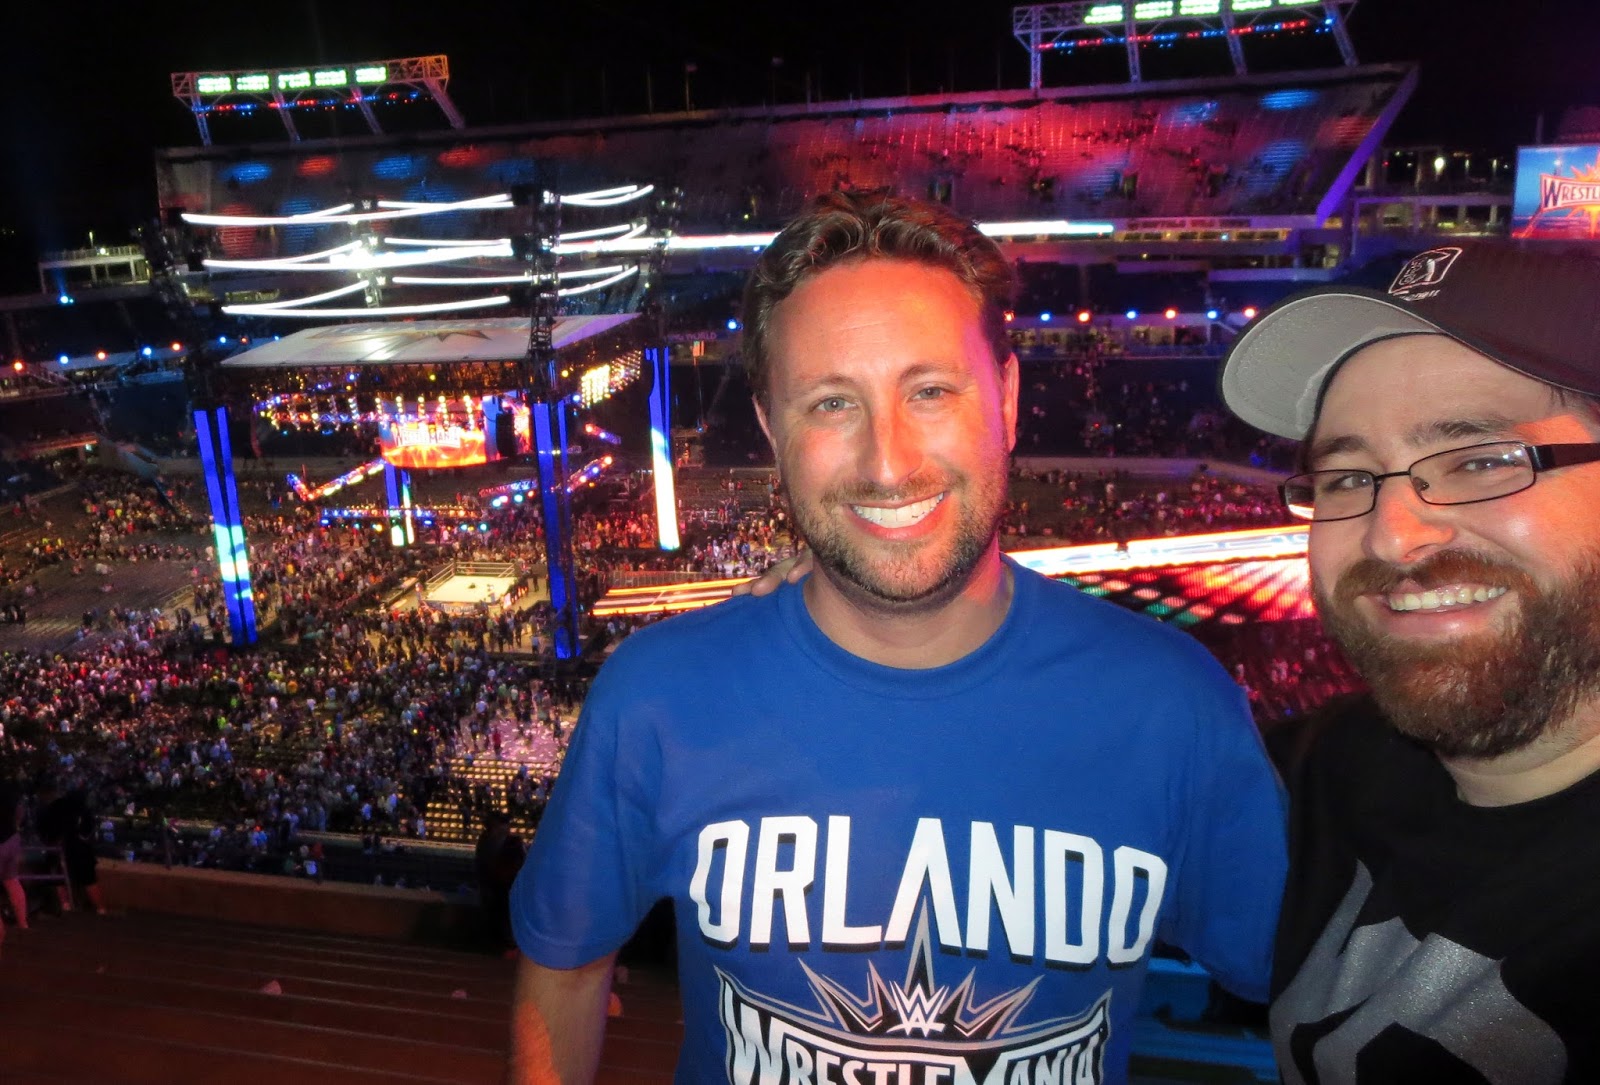 WrestleMania 33 was the 1st time I watched wrestling, and it blew